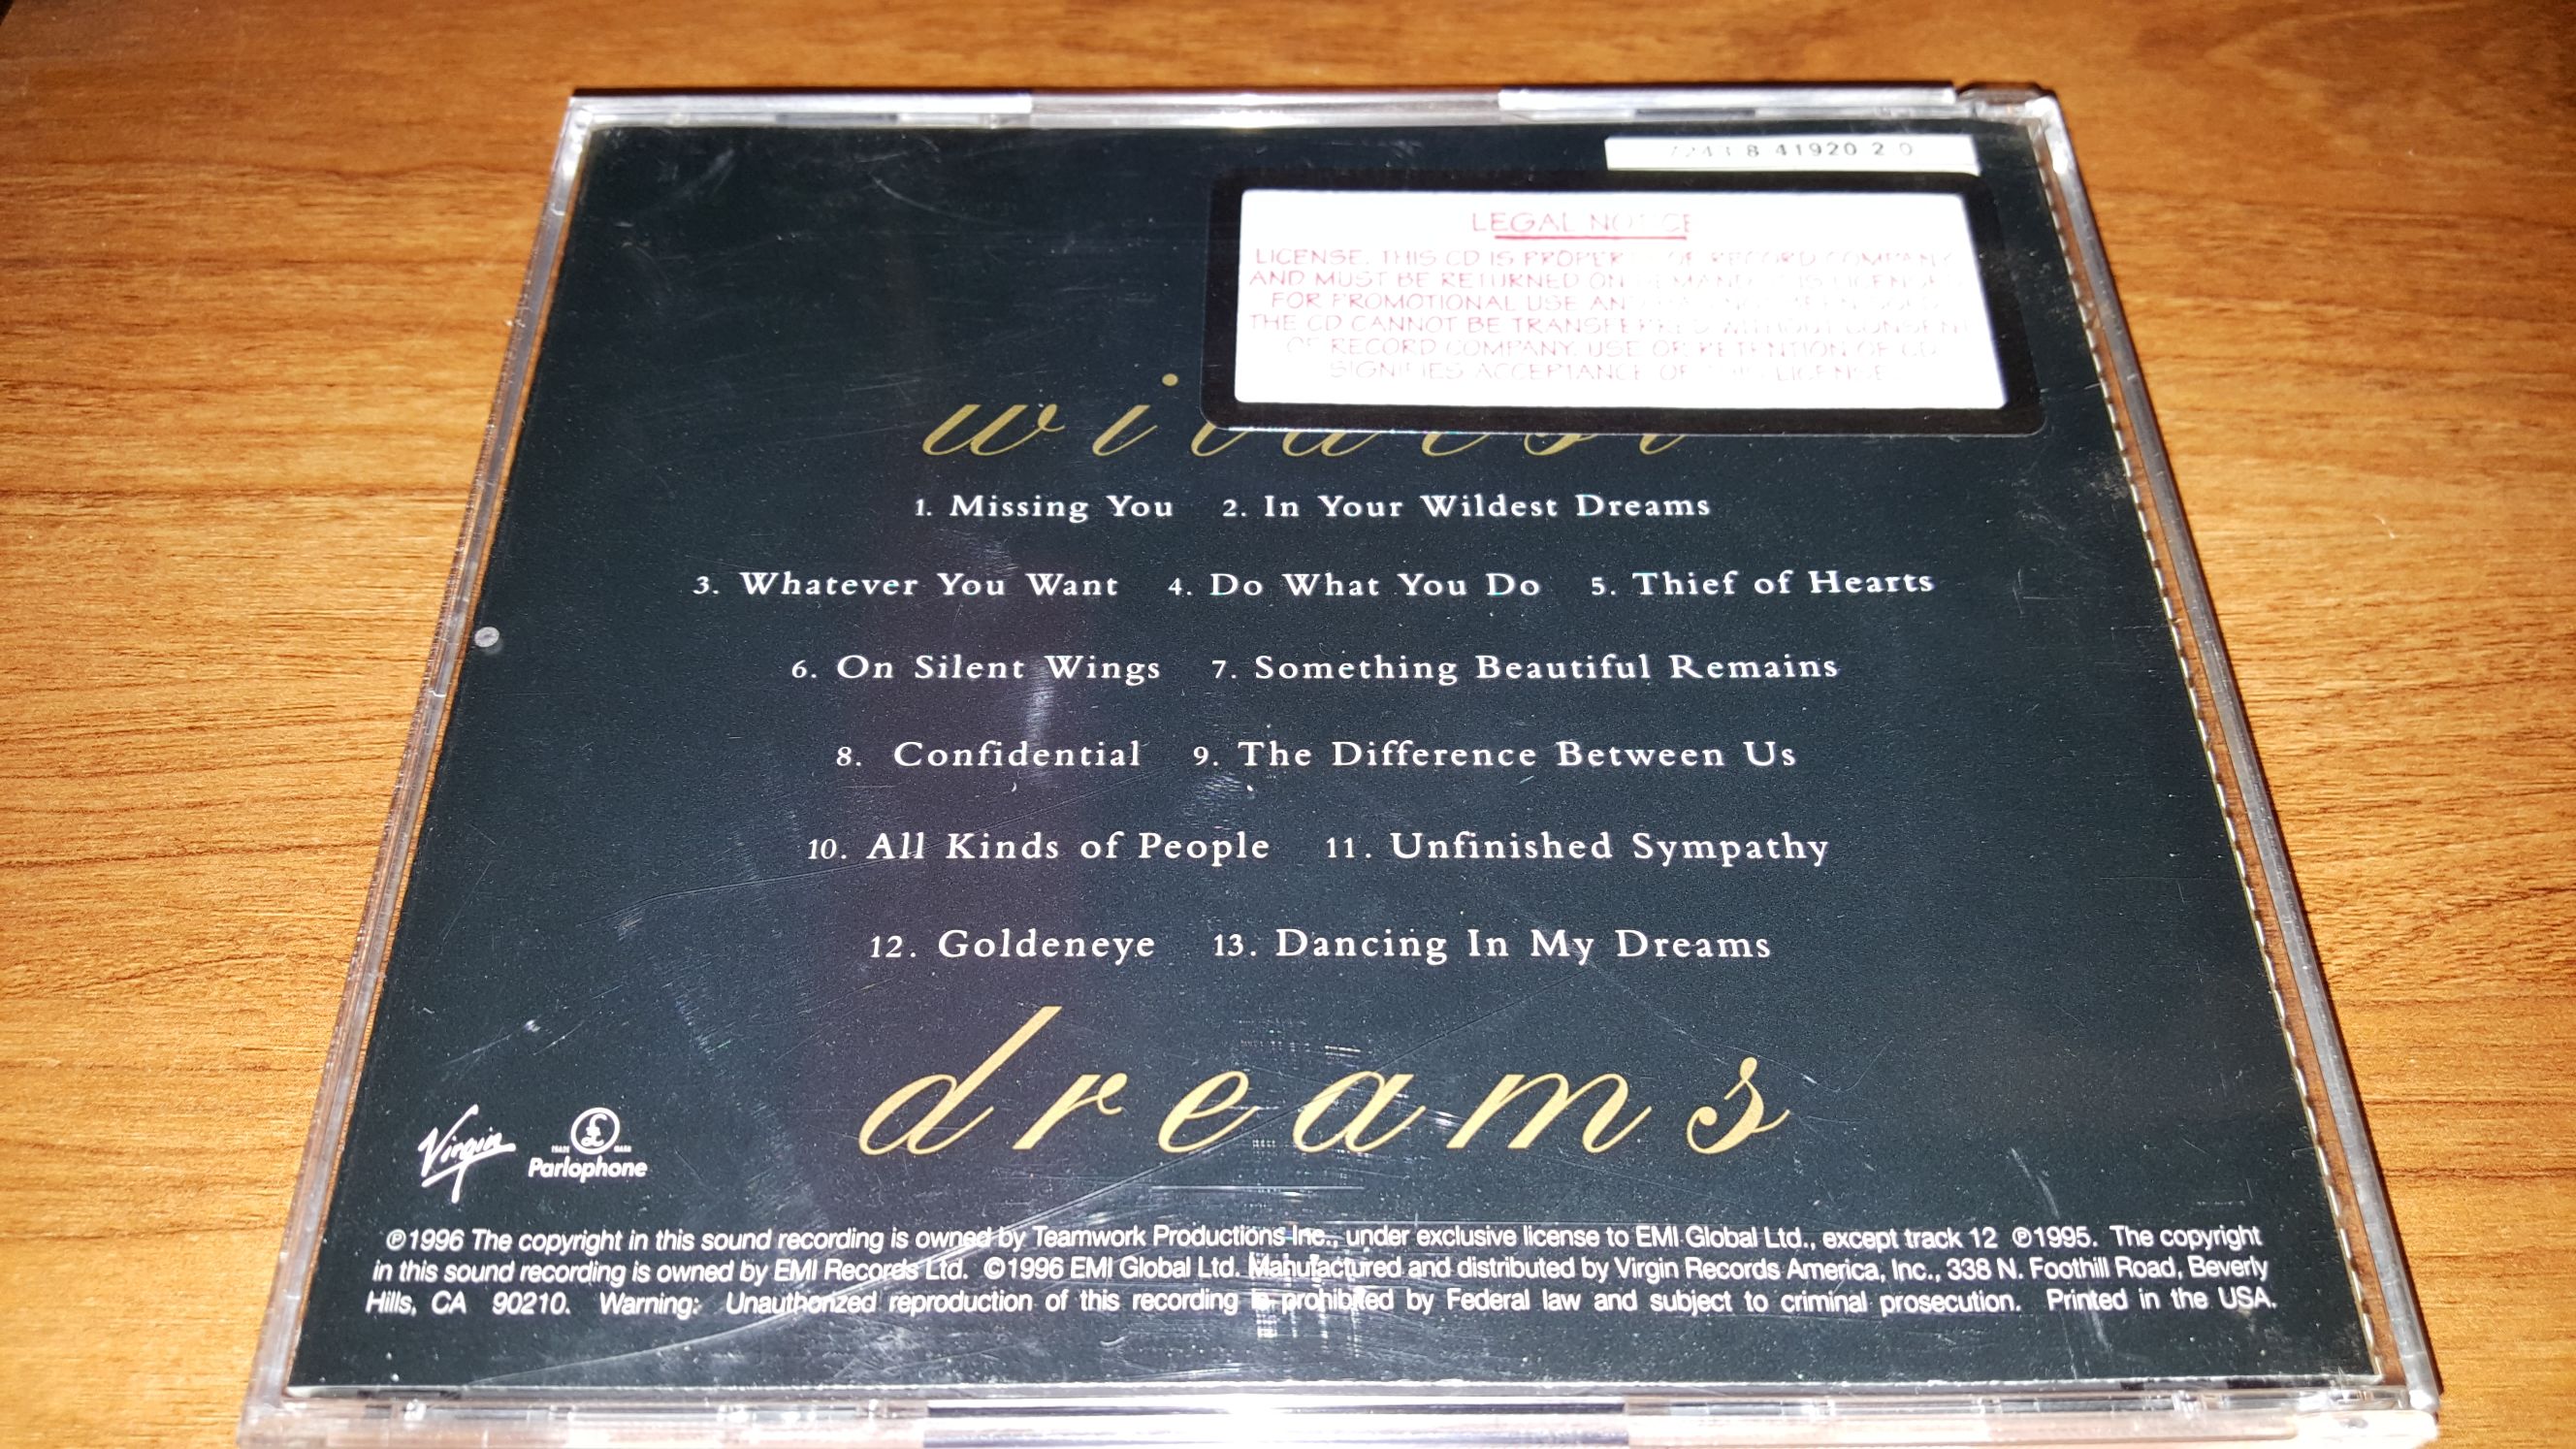 Wildest Dreams - Tina Turner (CD) music collectible - Main Image 2